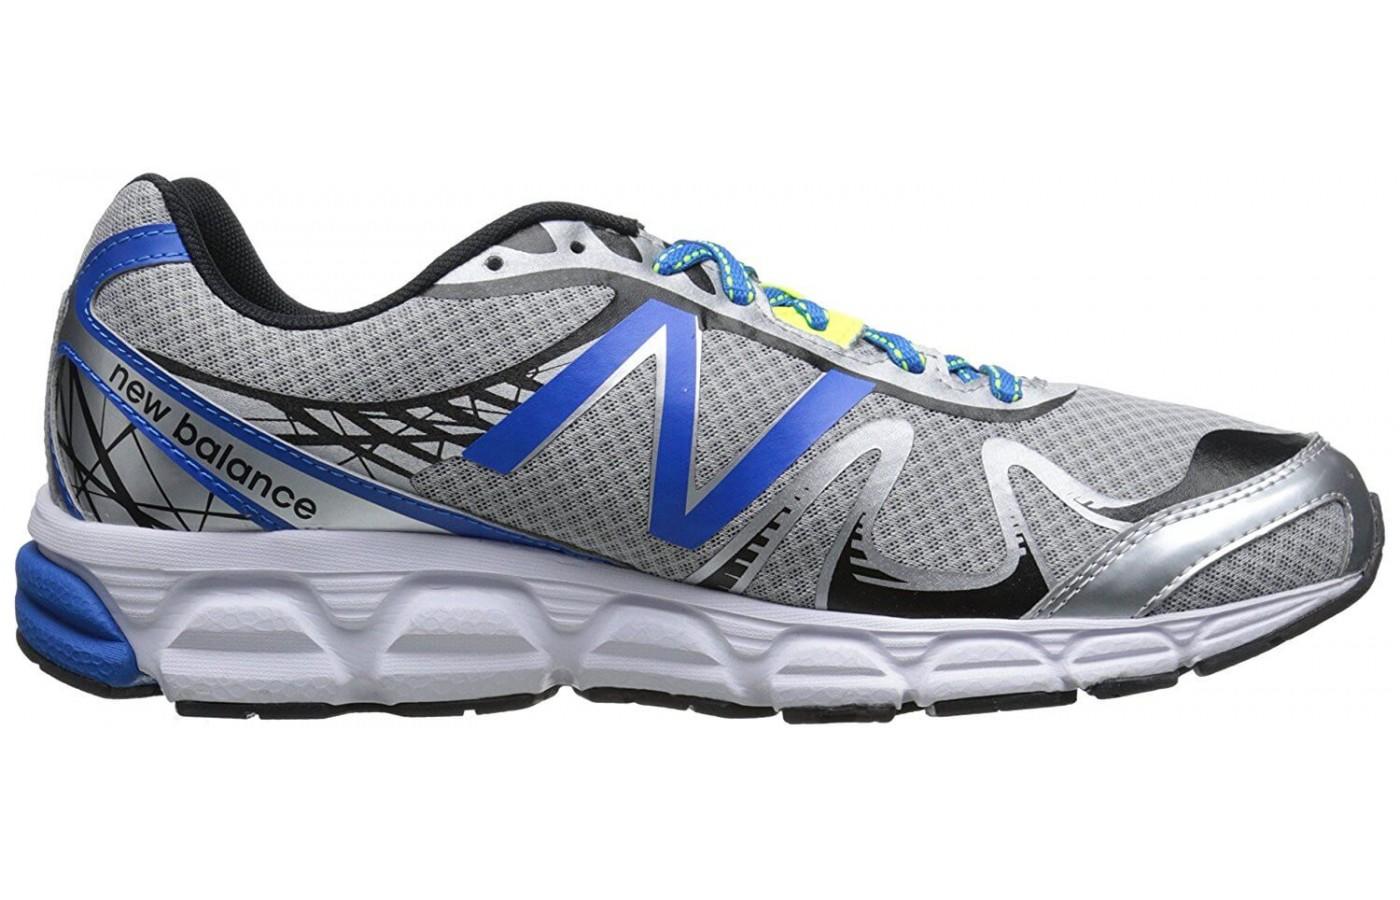 the New Balance 780 v5 provides neutral support for daily running